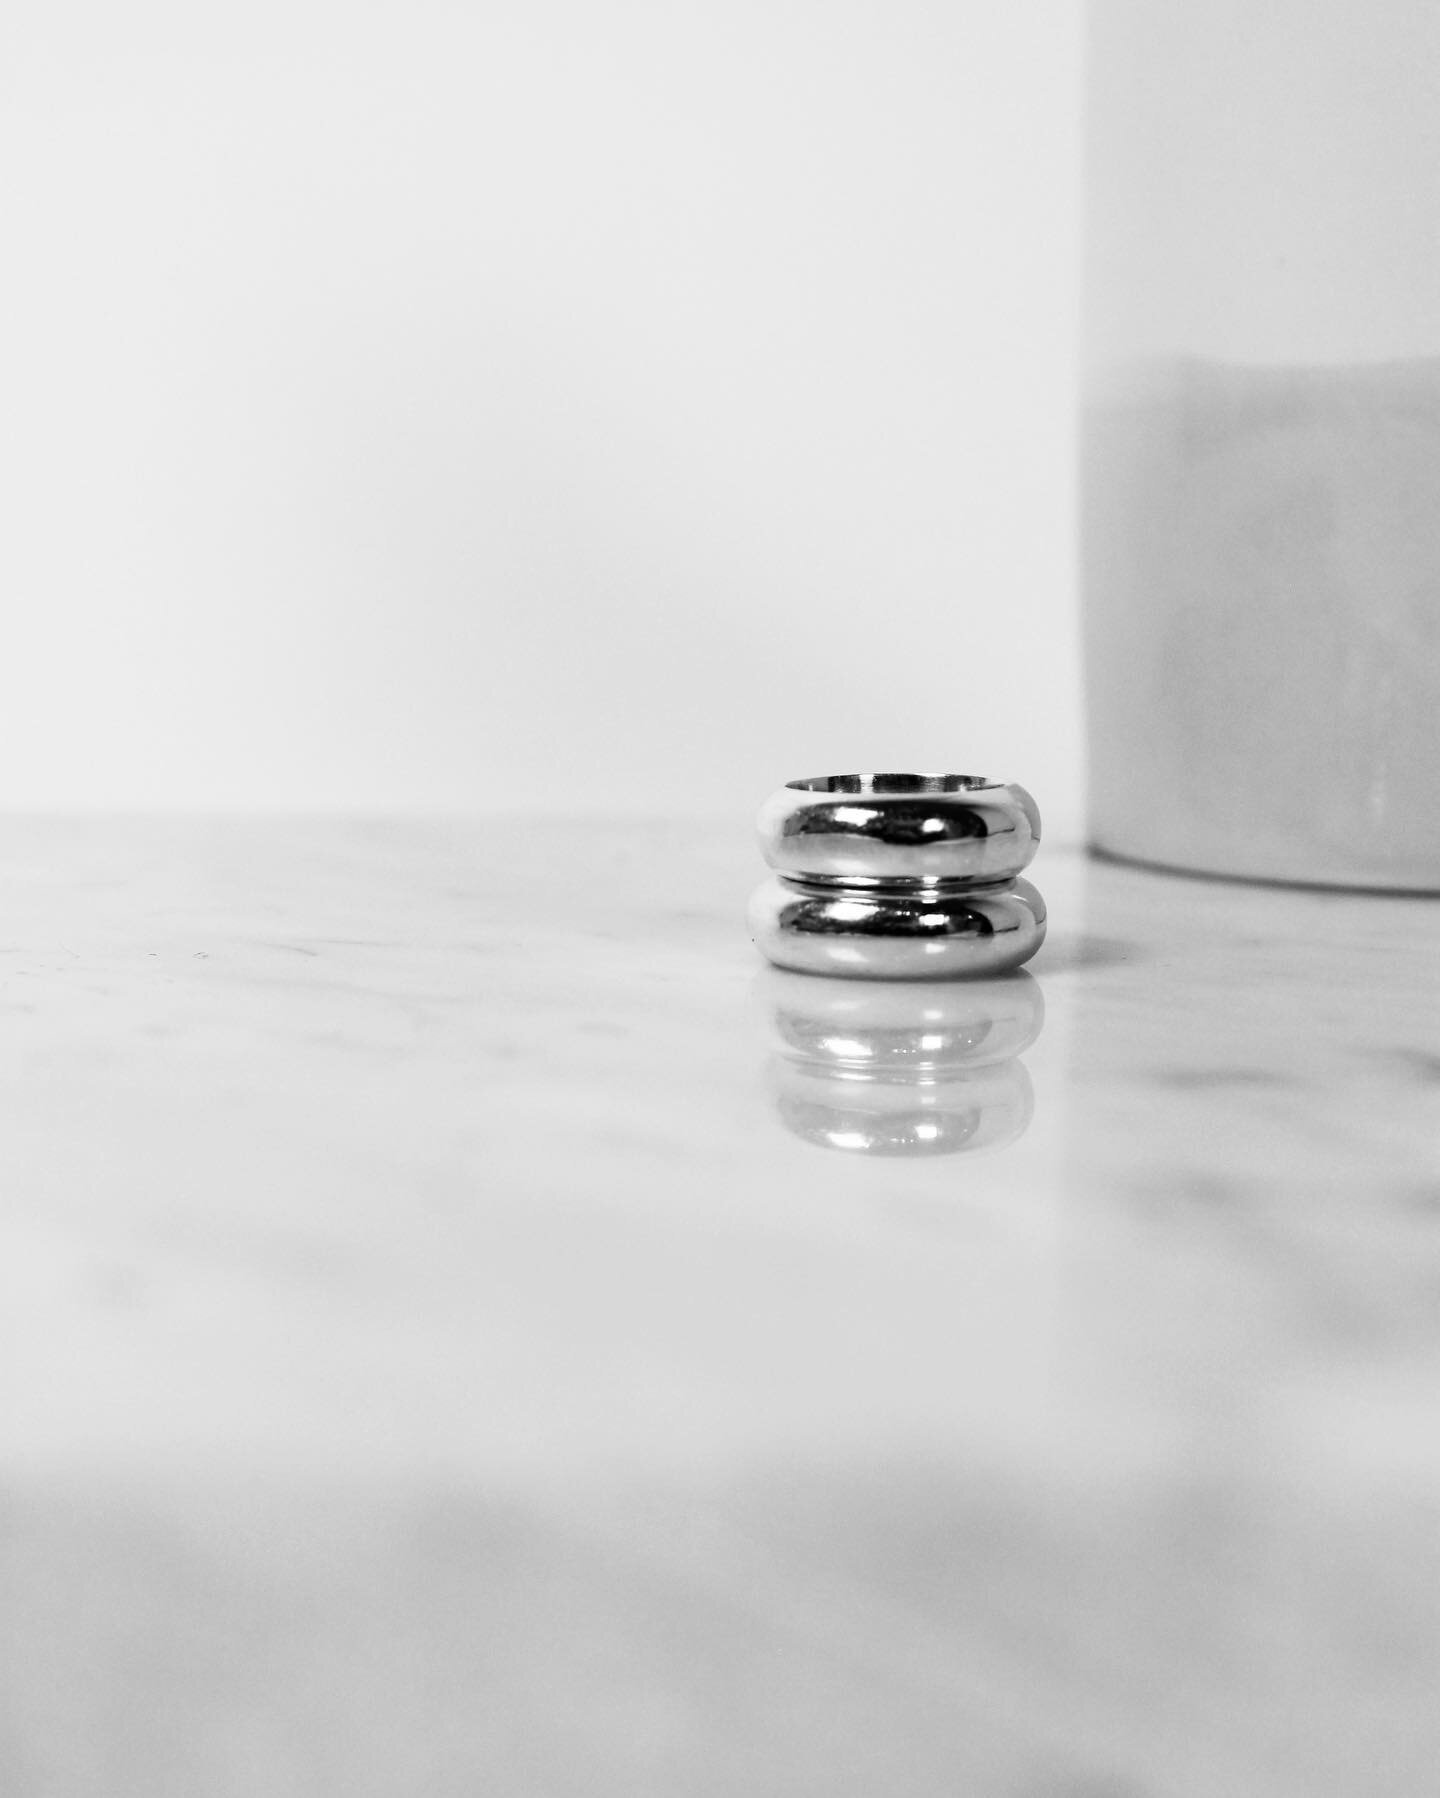 The design of the no 1 &mdash; the silver ring consists of two separate rings but worn together.

⠀⠀⠀⠀⠀⠀⠀⠀⠀⠀⠀⠀⠀⠀⠀⠀⠀⠀⠀⠀⠀⠀⠀⠀⠀⠀⠀⠀⠀⠀⠀⠀⠀⠀⠀⠀⠀⠀⠀⠀⠀⠀⠀⠀⠀⠀⠀⠀⠀⠀⠀⠀⠀⠀⠀
.
.
.
#brjewellery #jewellery #jewellerydesign #handmadejewellery #minimaldesign #madetolast #si